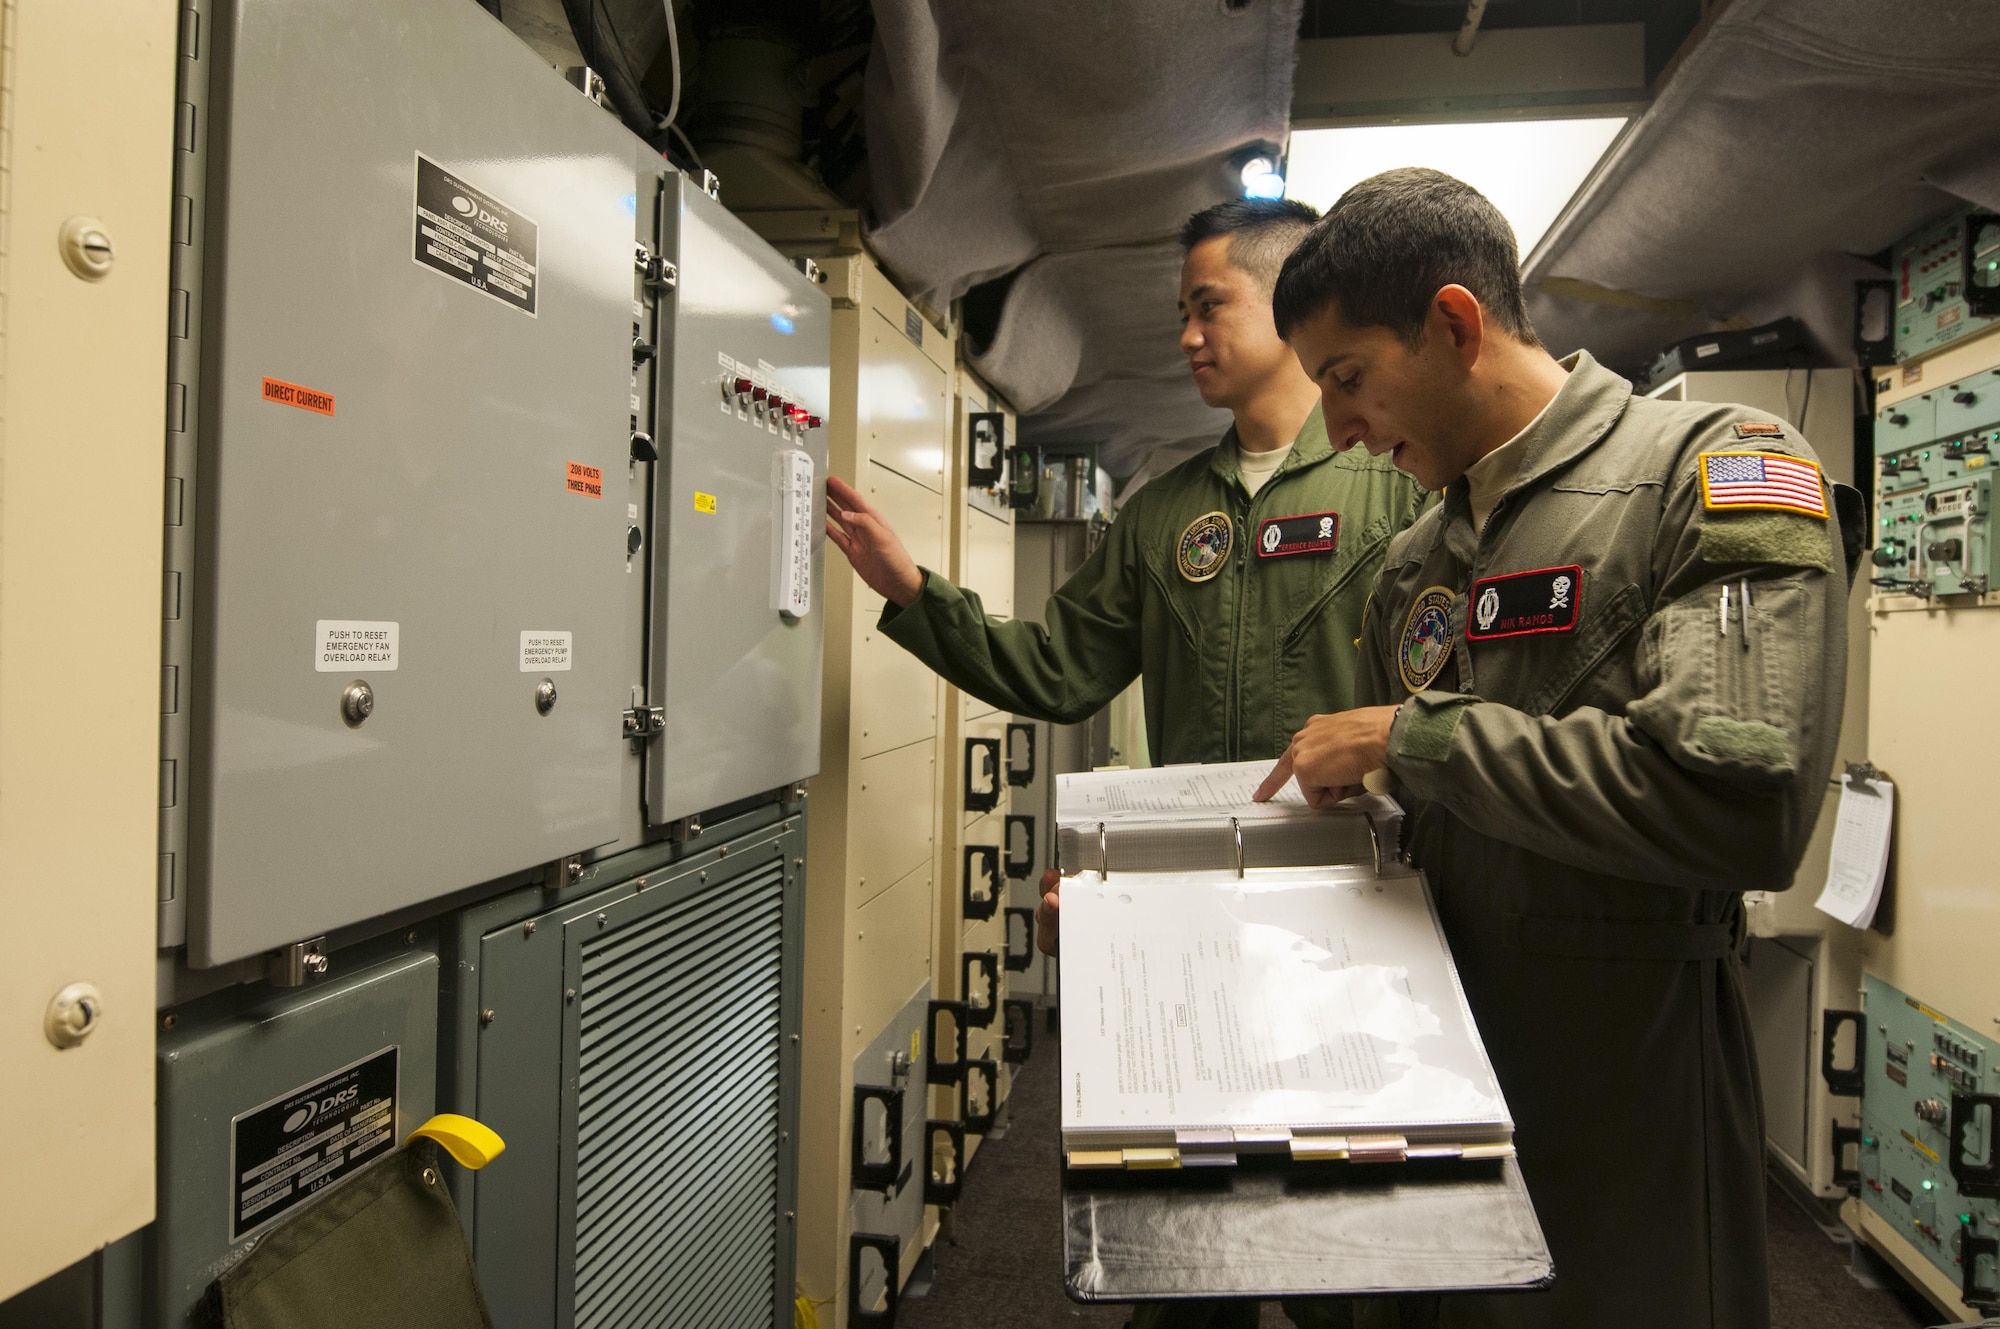 Second Lt. Nikolas Ramos, 320th Missile Squadron deputy missile combat crew commander, reads a checklist while 1st Lt. Terrence Dale Duarte, missile combat crew commander complies with the instructions in a launch control center at F.E. Warren Air Force Base, Wyo., Nov. 5, 2016. The 90th Missile Wing sustains 150 Minuteman III ICBMs and the associated launch facilities that cover 9,600 square miles across three states. (U.S. Air Force photo by Staff Sgt. Christopher Ruano)